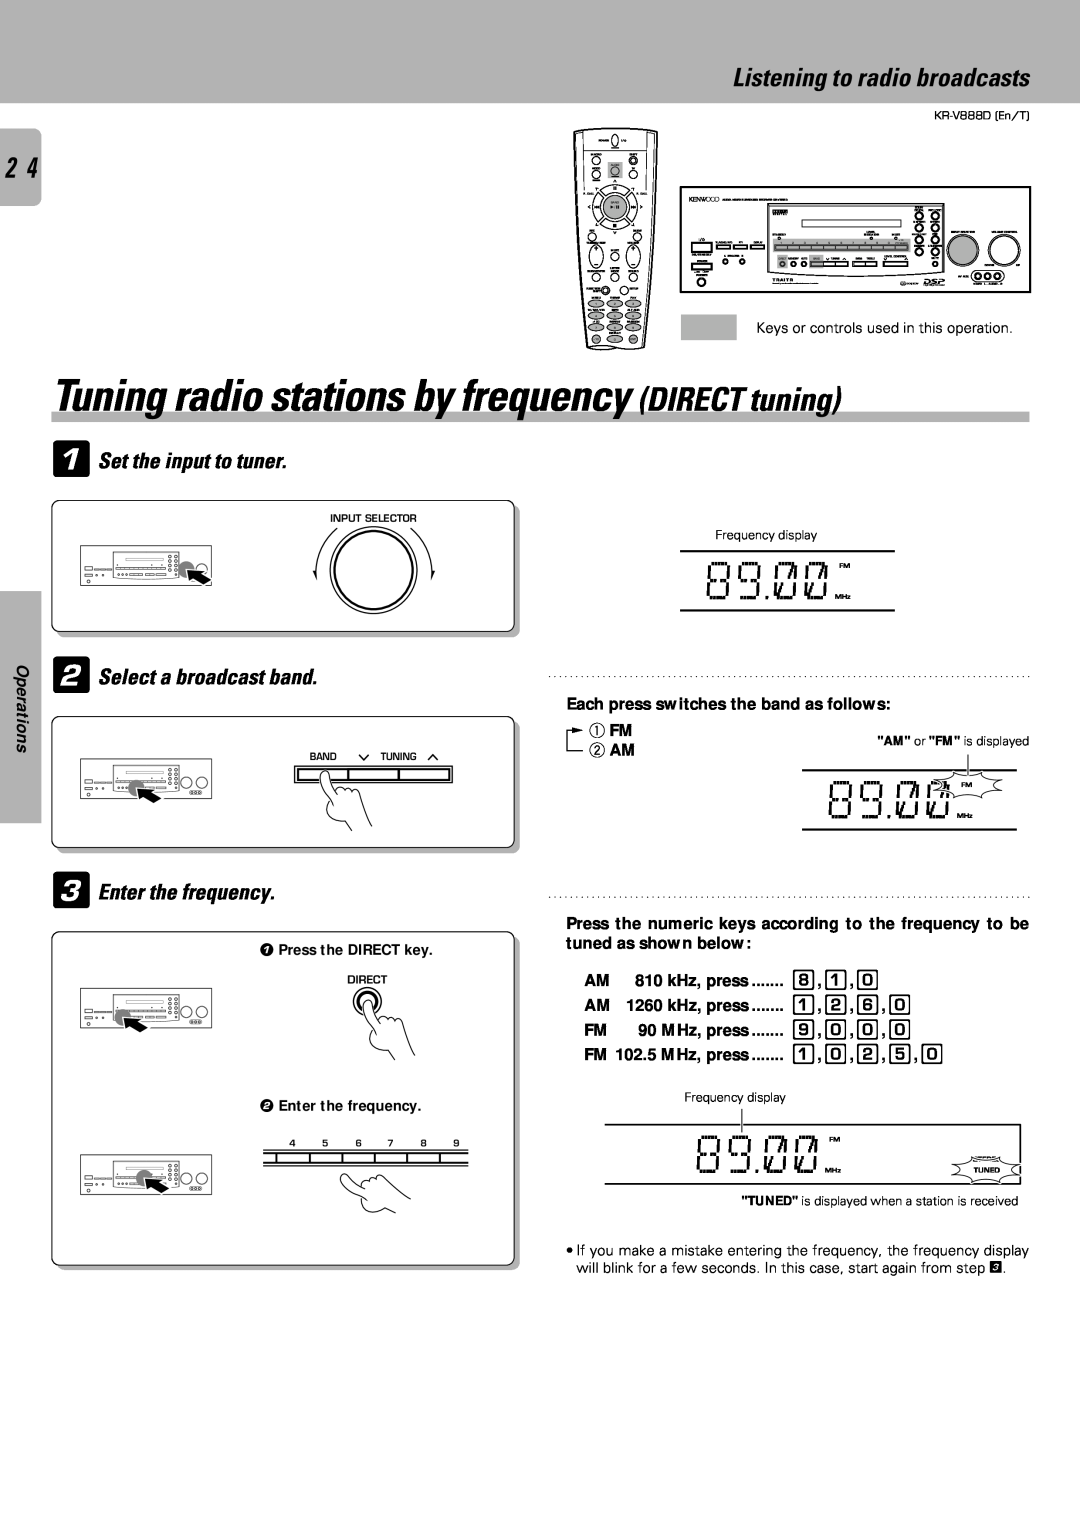 Kenwood KR-V888D Tuning radio stations by frequency DIRECT tuning, Listening to radio broadcasts, 3Enter the frequency 